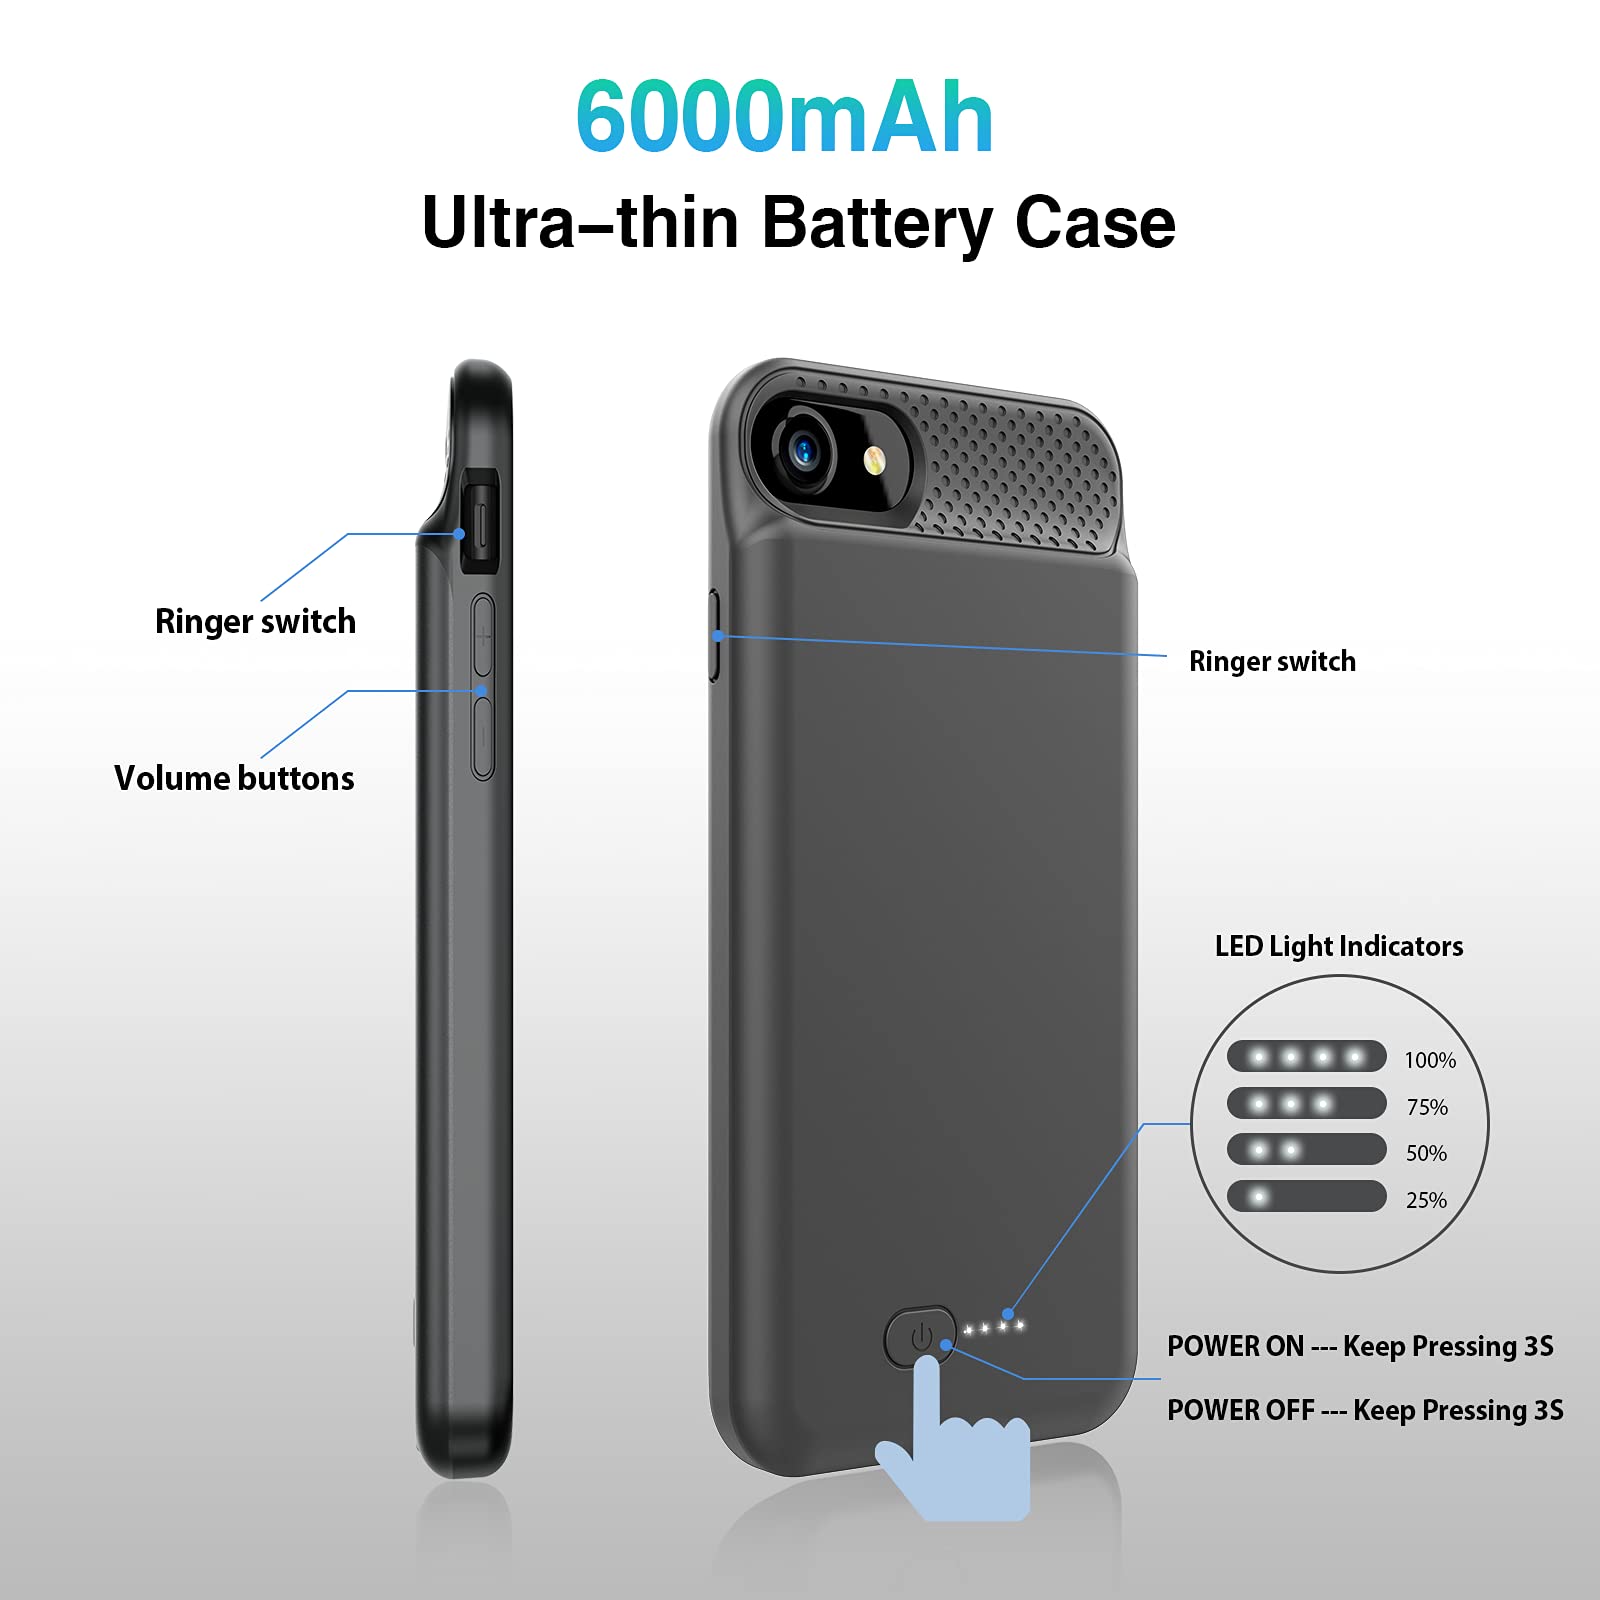 Battery Case for iPhone 6/6s/7/8/SE 2020/SE 2022, ATGIH Real 6000mAh Ultra Slim Extended Power Case Protective Smart Charger Cover for Apple iPhone Support Lighting C Type Changing-4.7inch, Black